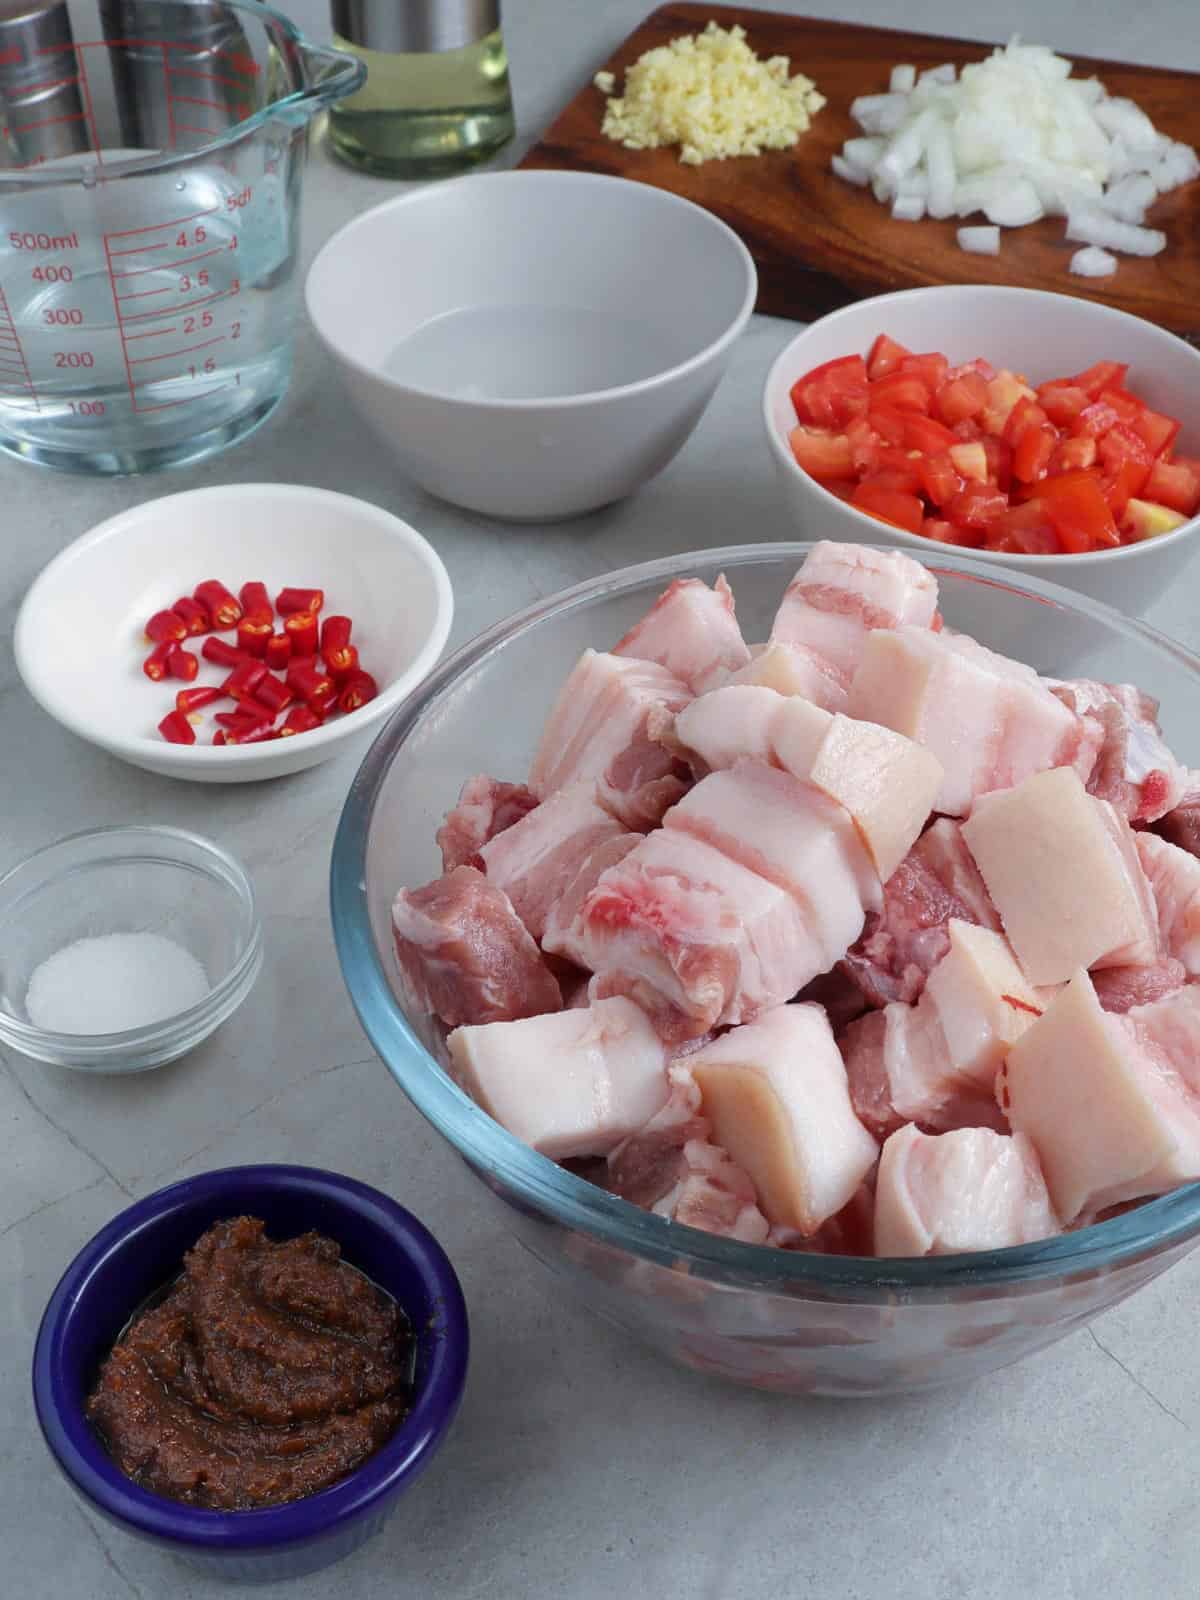 diced pork belly, chopped tomatoes, shrimp paste, minced chili peppers, water, vinegar, salt in individual bowls